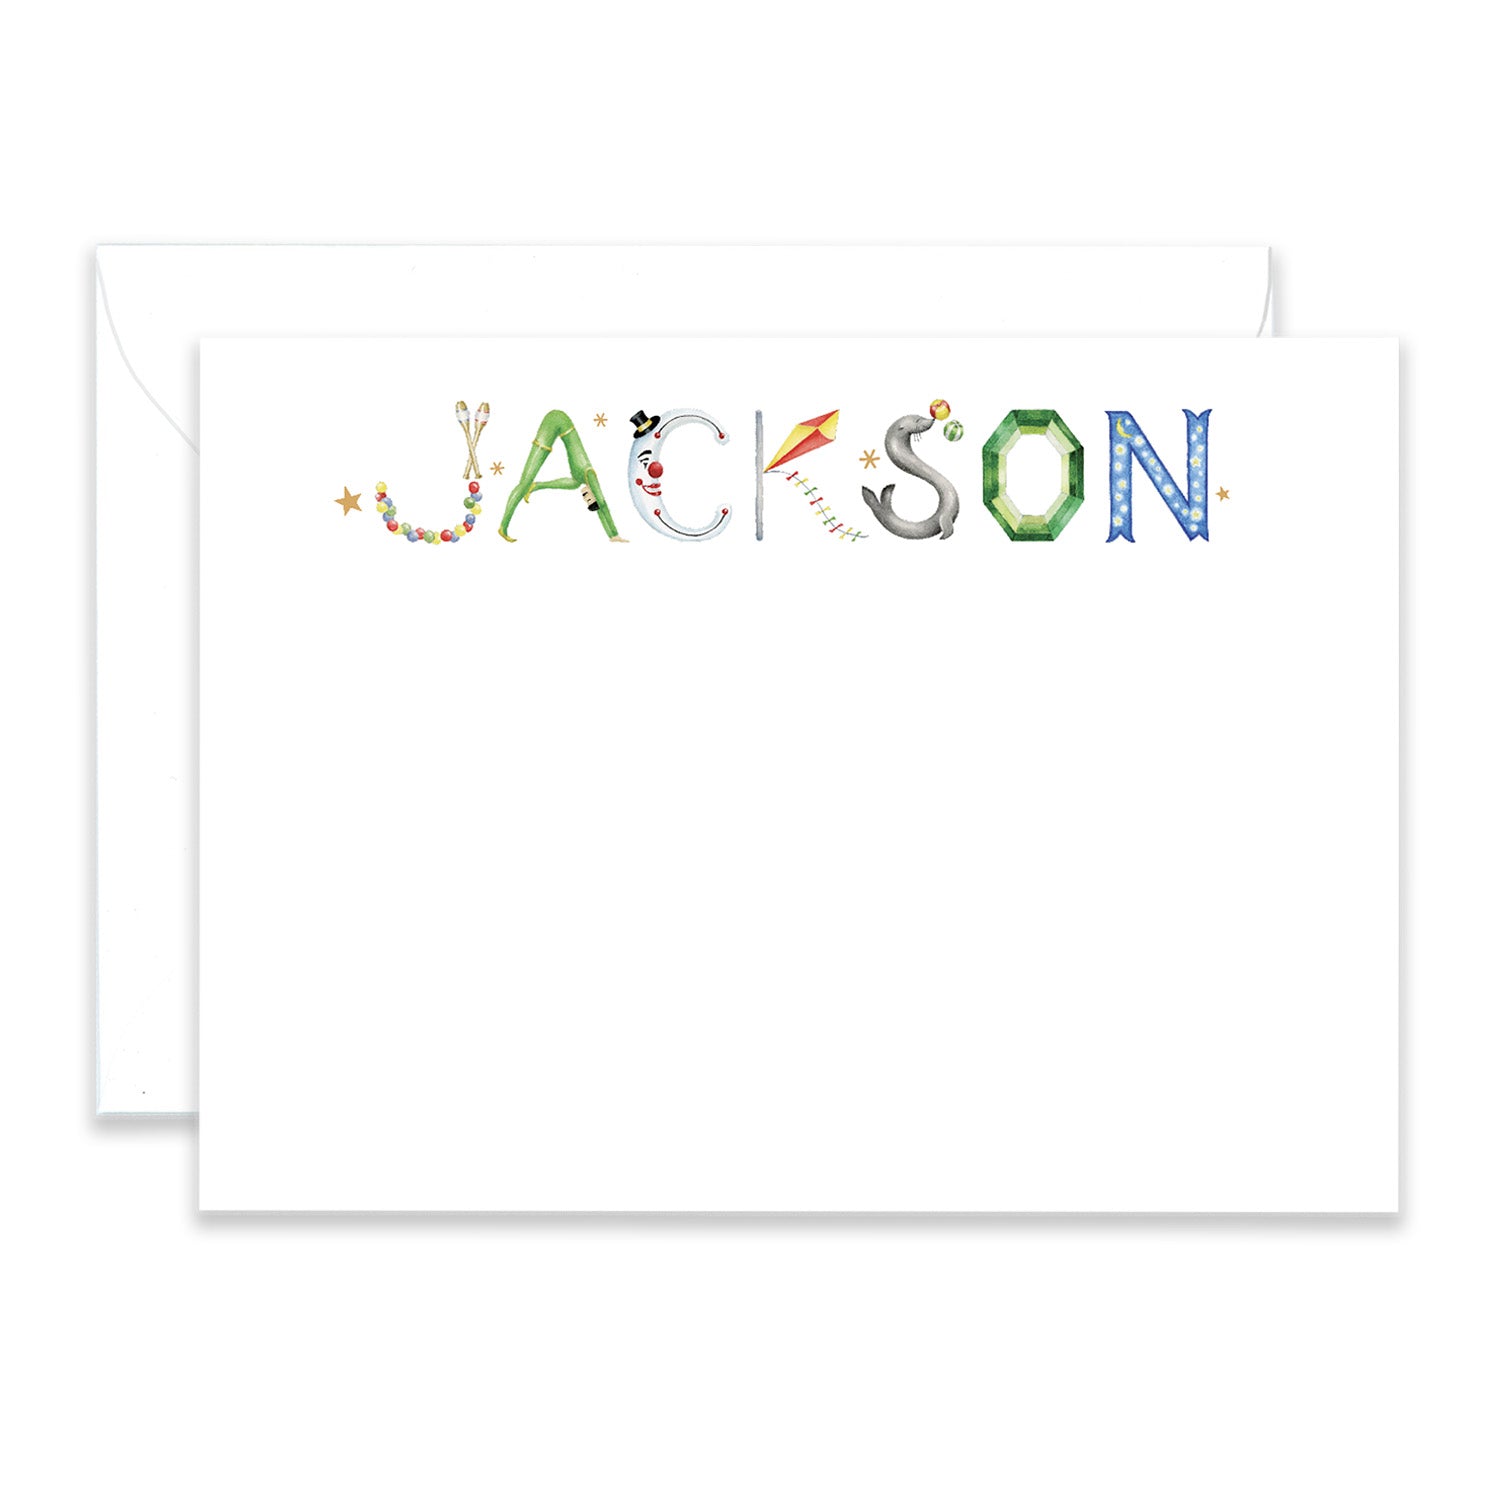 Personalized Circus Stationery shown in the name "Jackson" with matching envelope